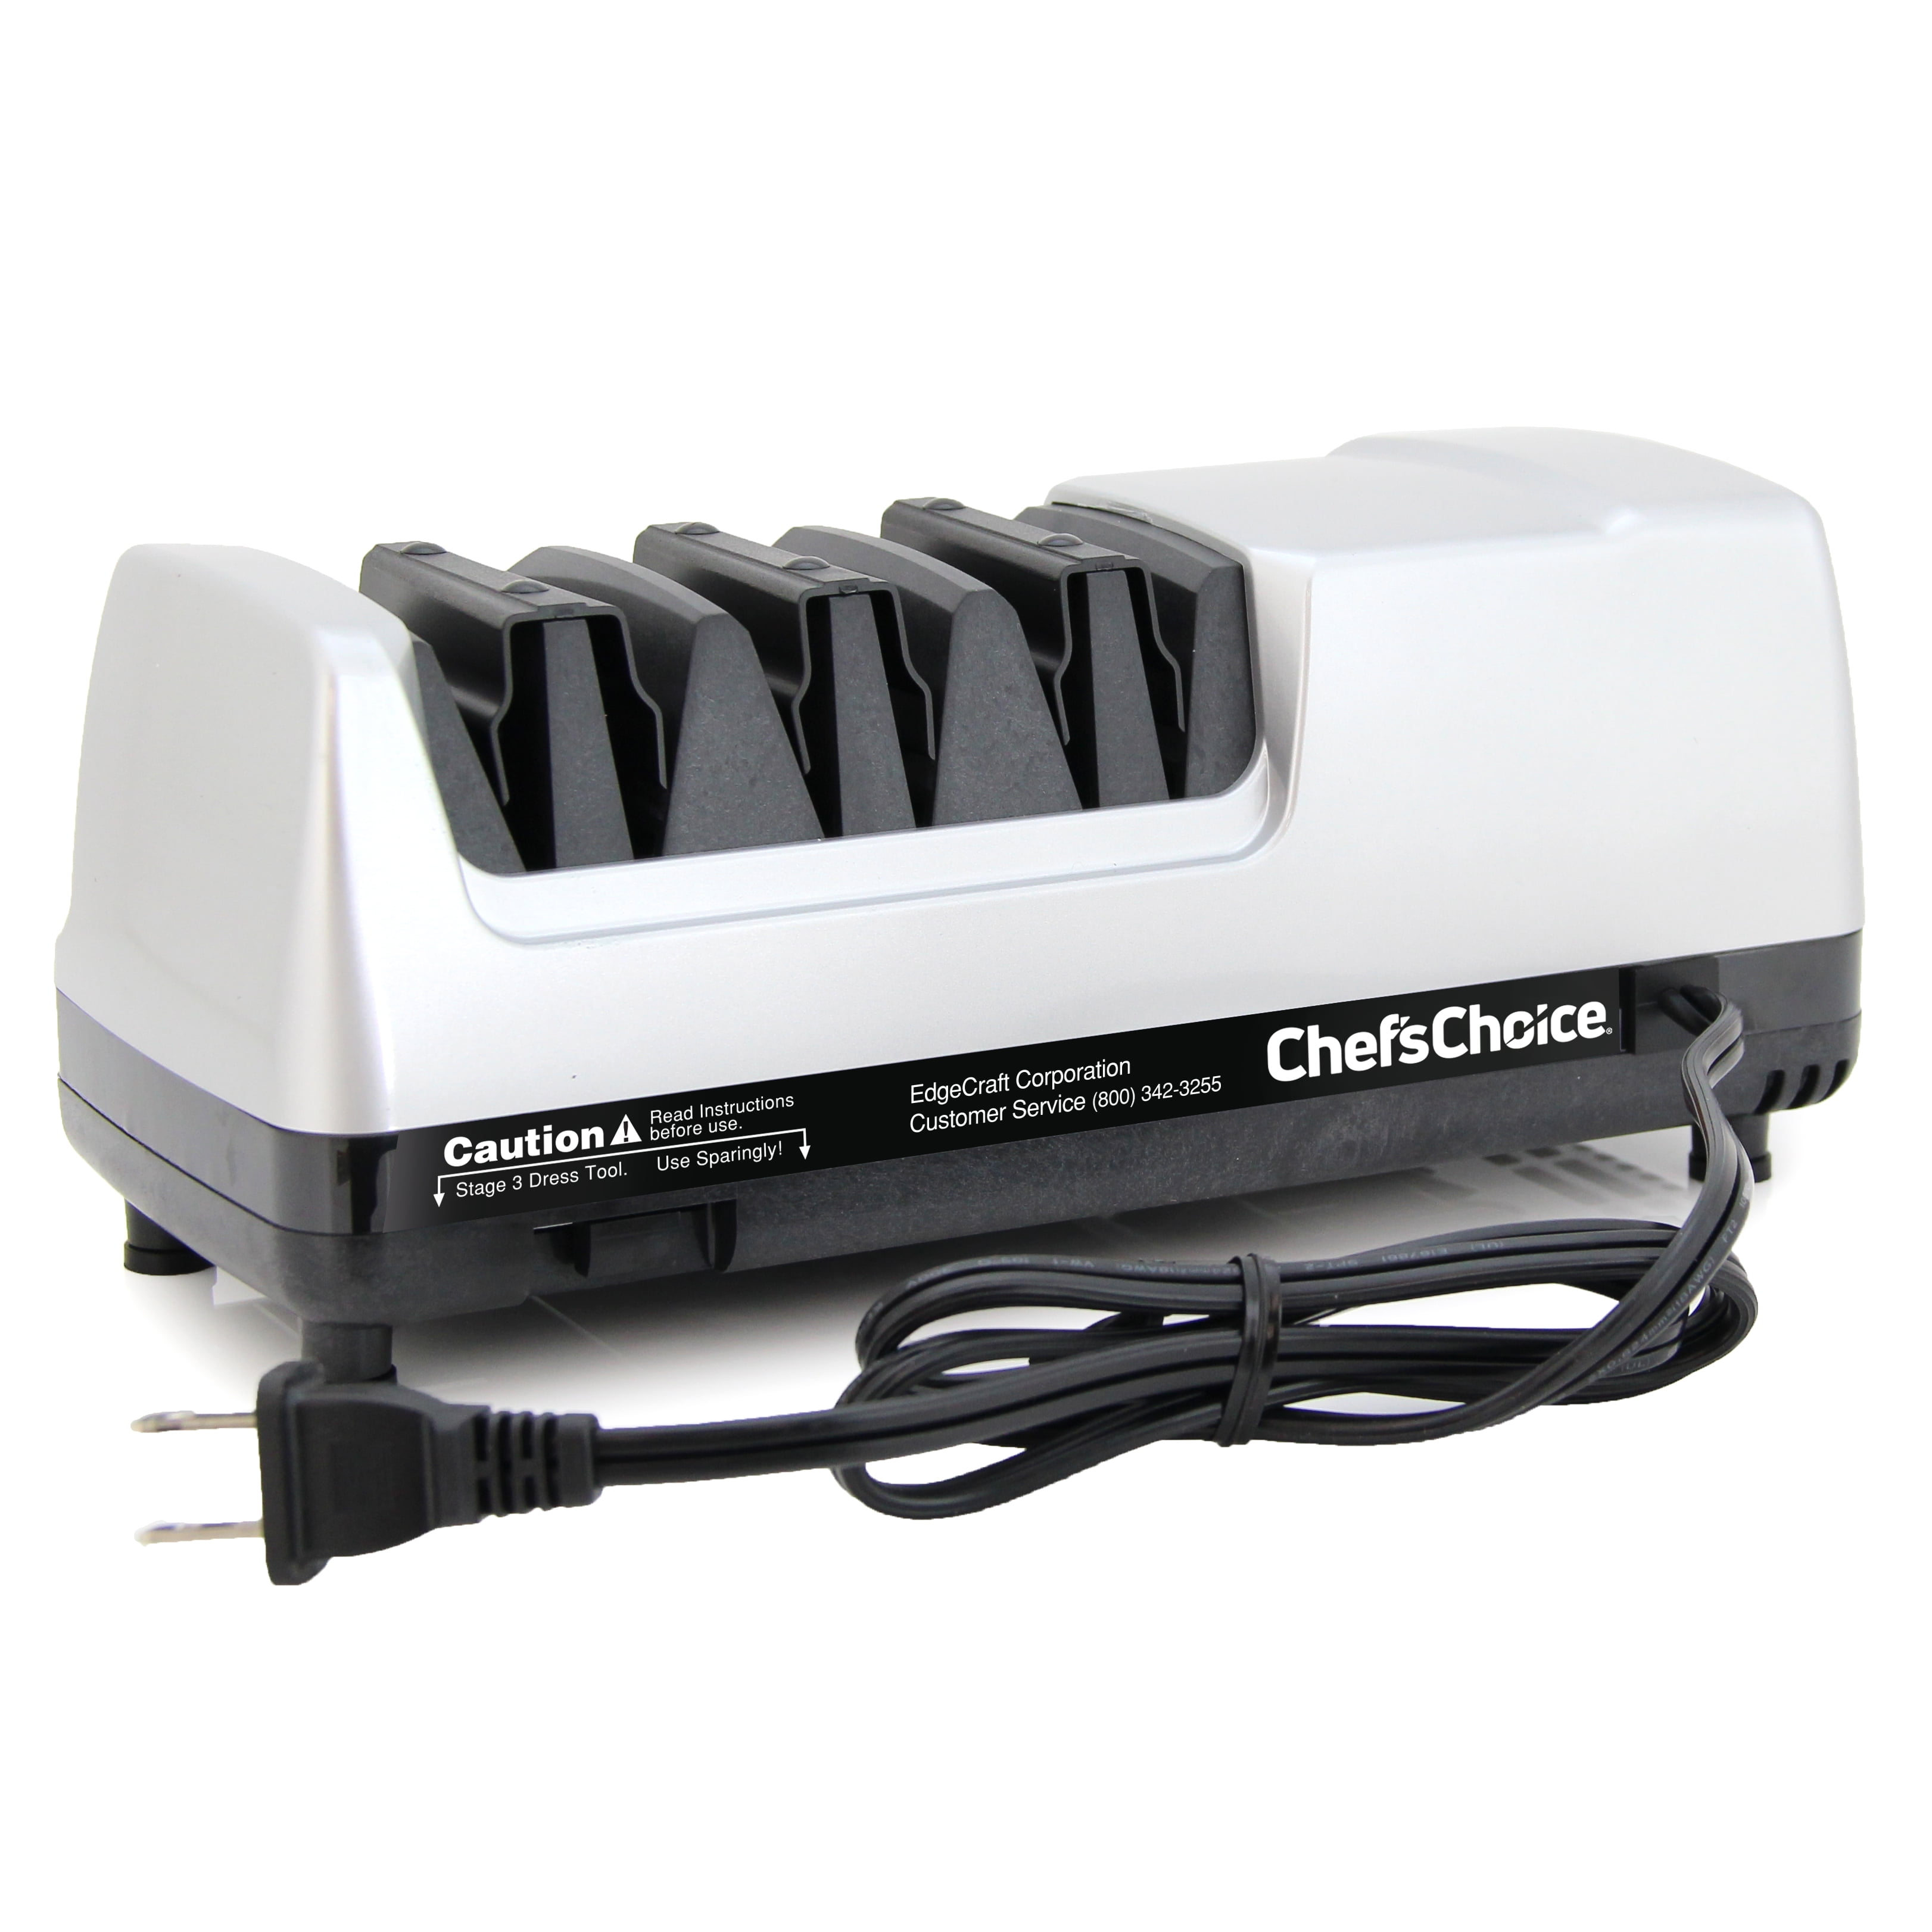 Chef'sChoice Edgecraft Model E315 Professional Electric Knife Sharpener,  2-stage 15-degree Dizor, In Gray (she315gy11) in the Sharpeners department  at